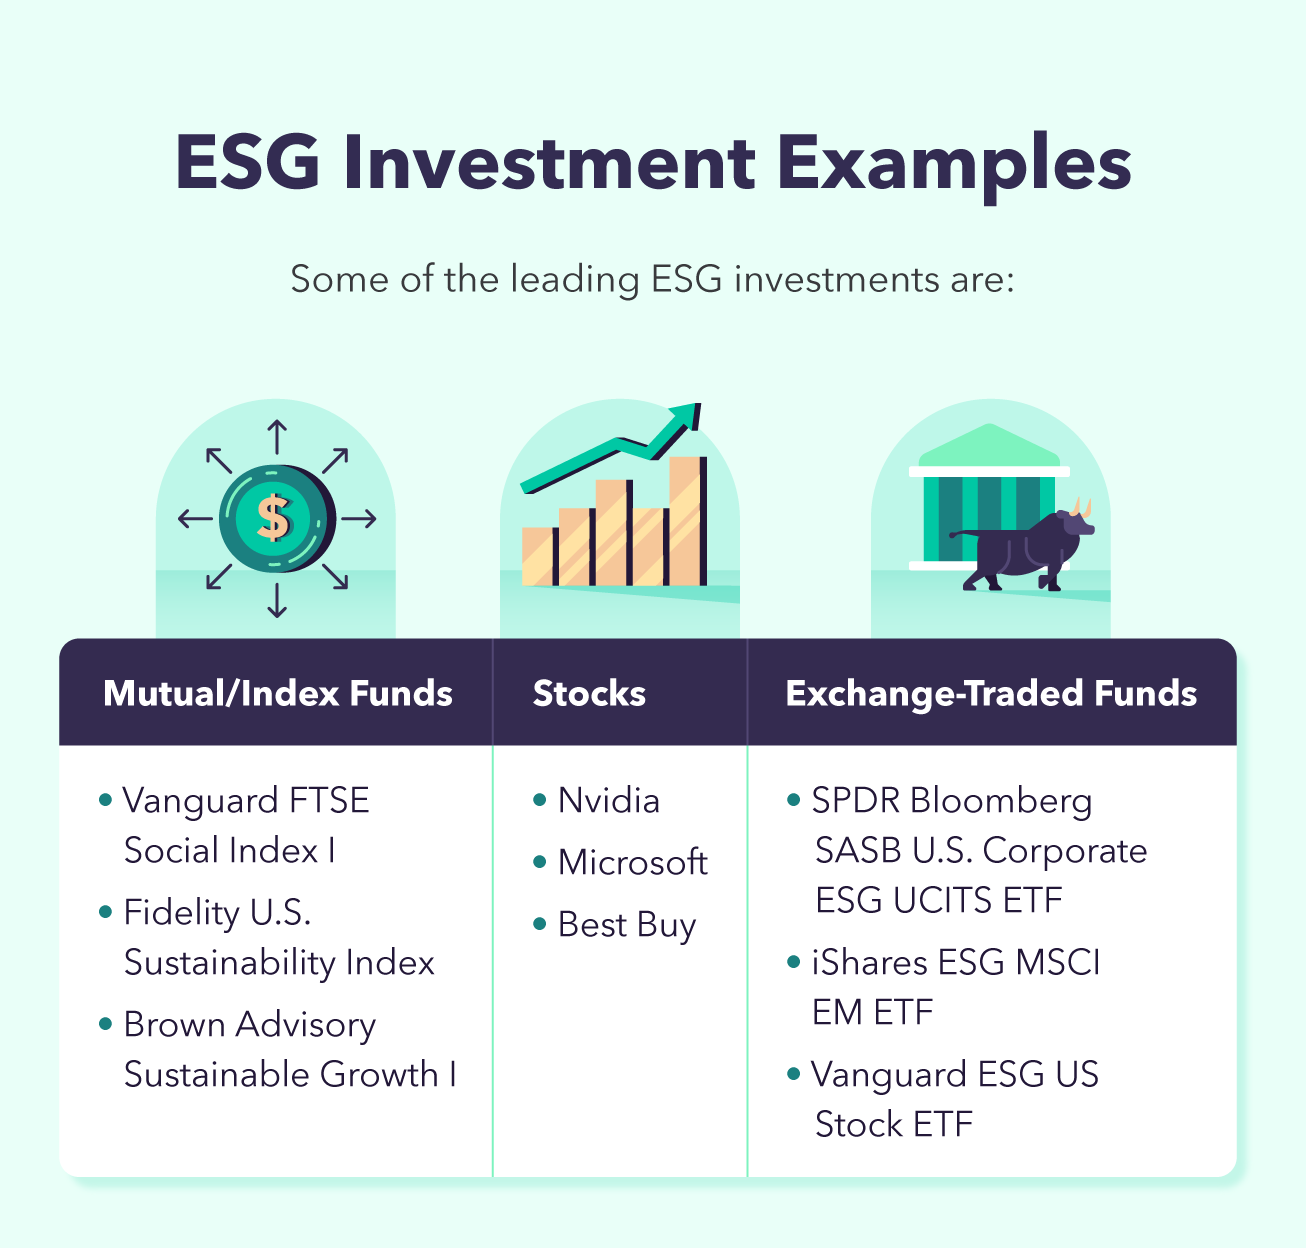 ESG investments exist in several forms, including mutual funds, stocks, and exchange-traded funds. 